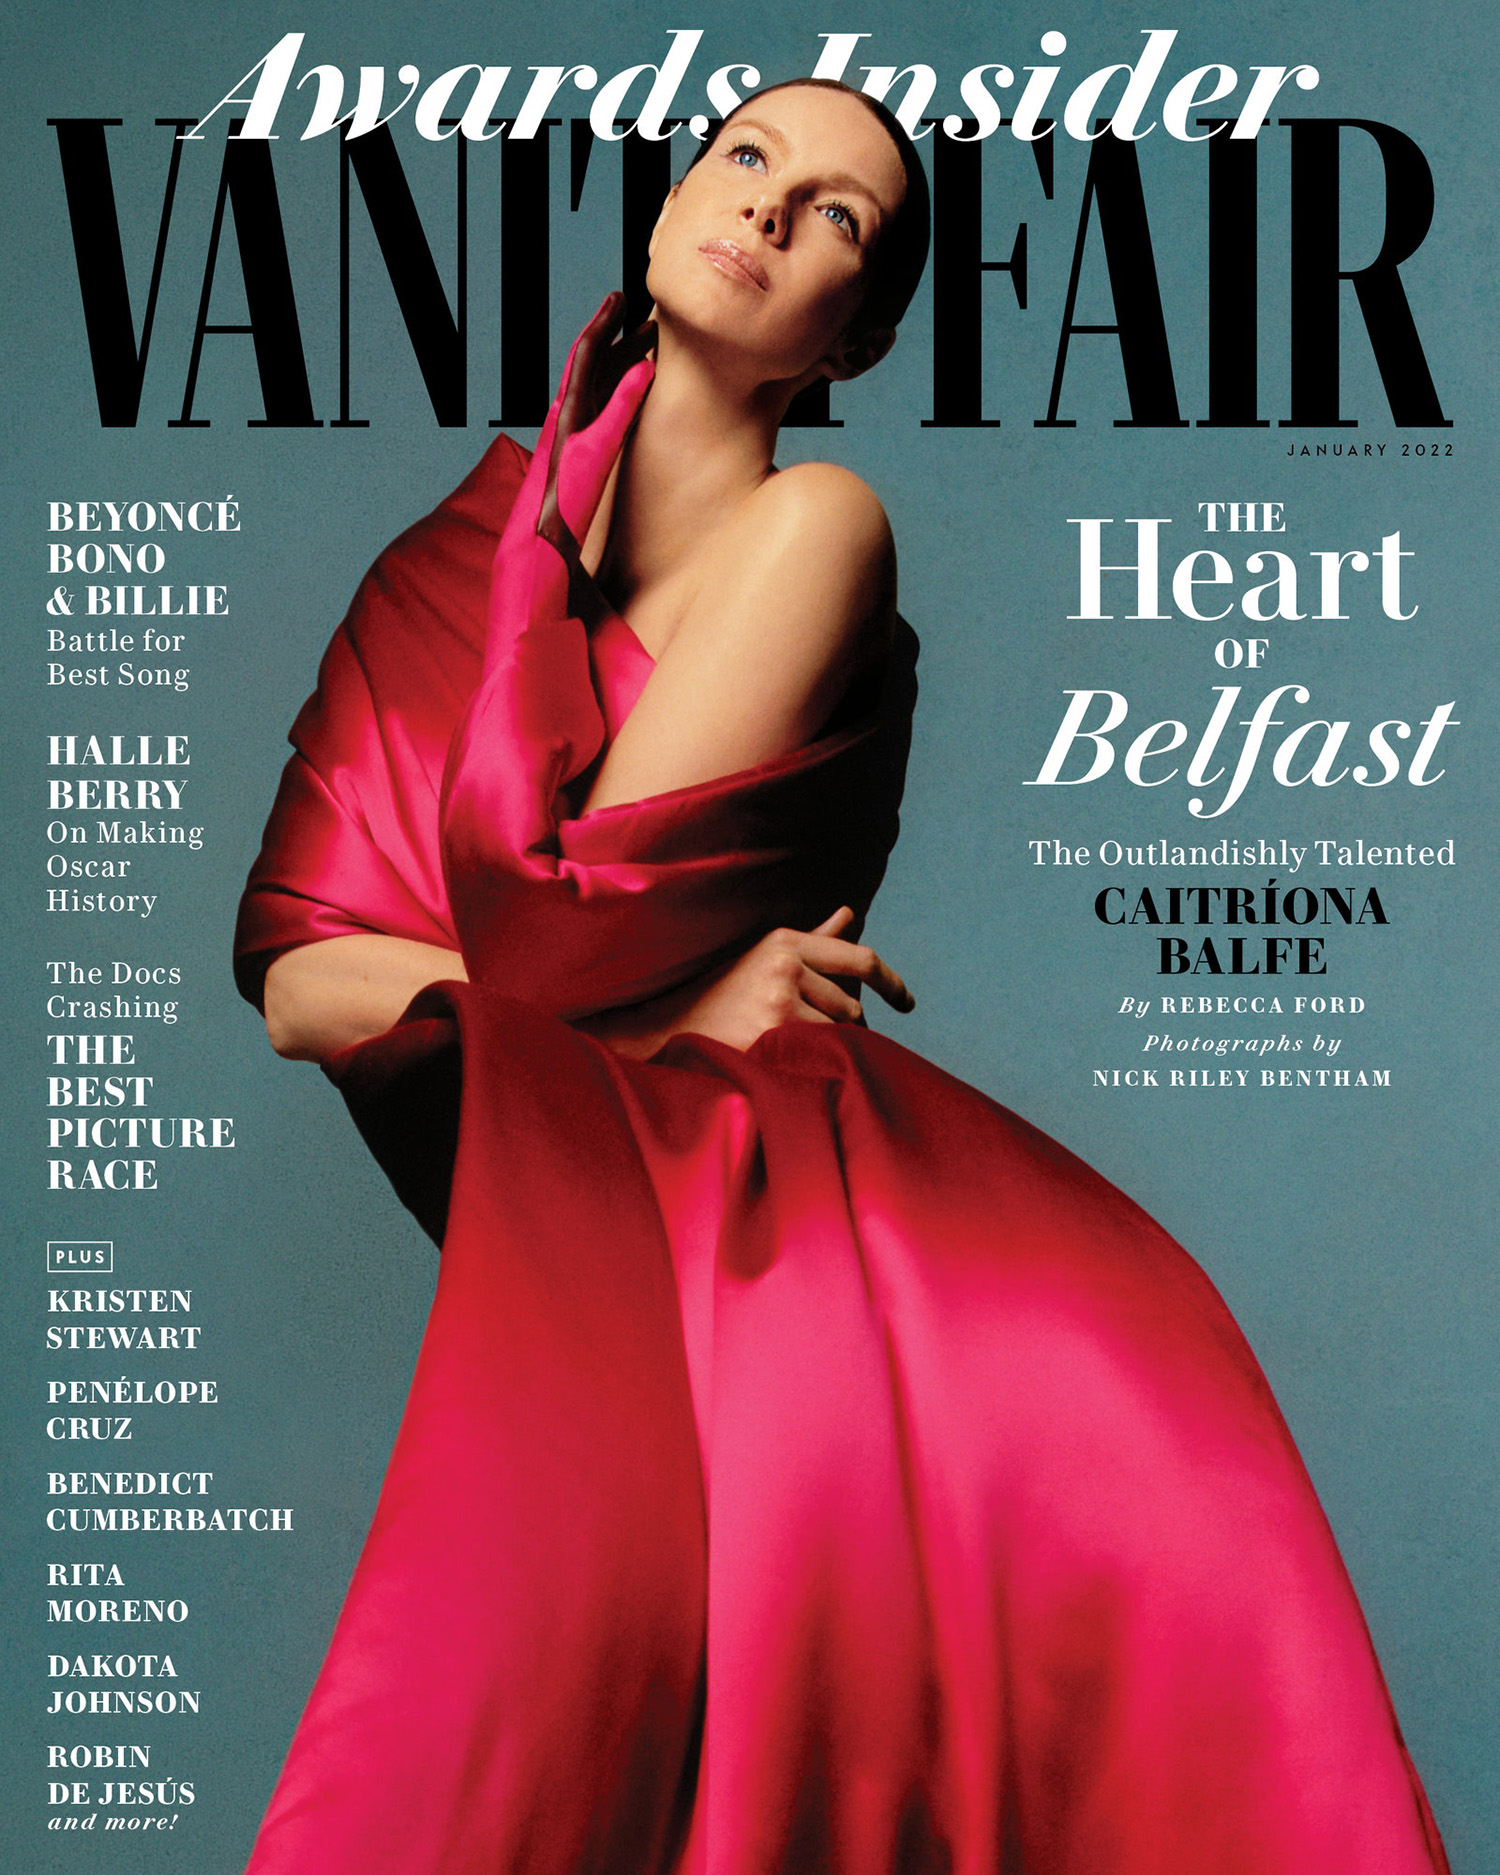 Caitriona Balfe in Marc Jacobs on Vanity Fair January 2022 cover by Nick Riley Bentham